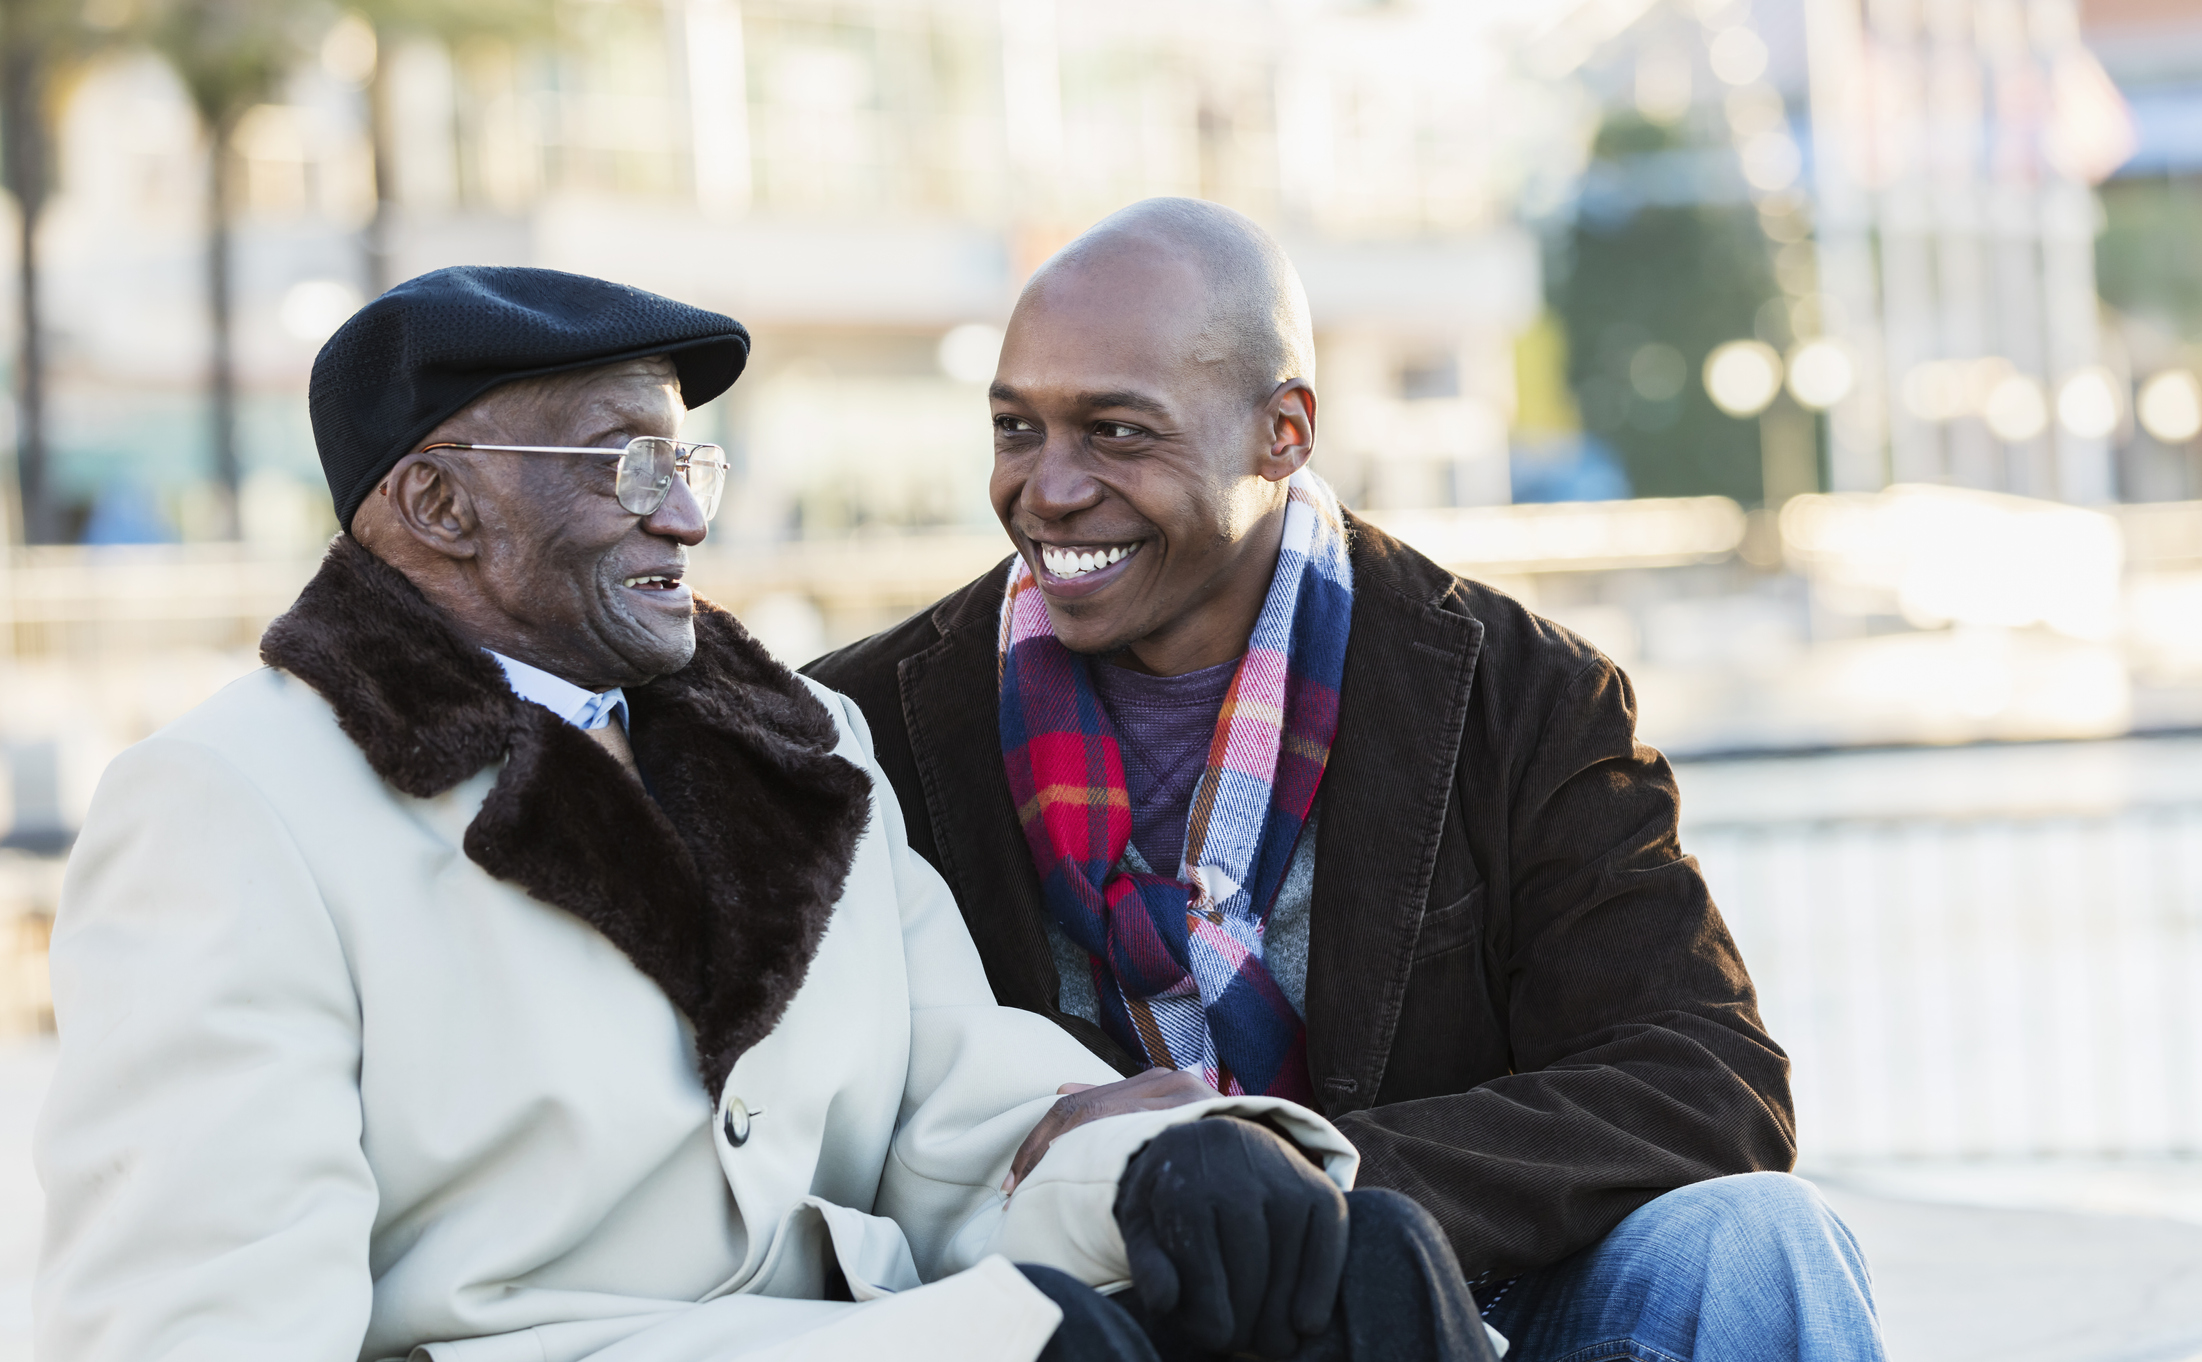 African-American man with grandfather In city 